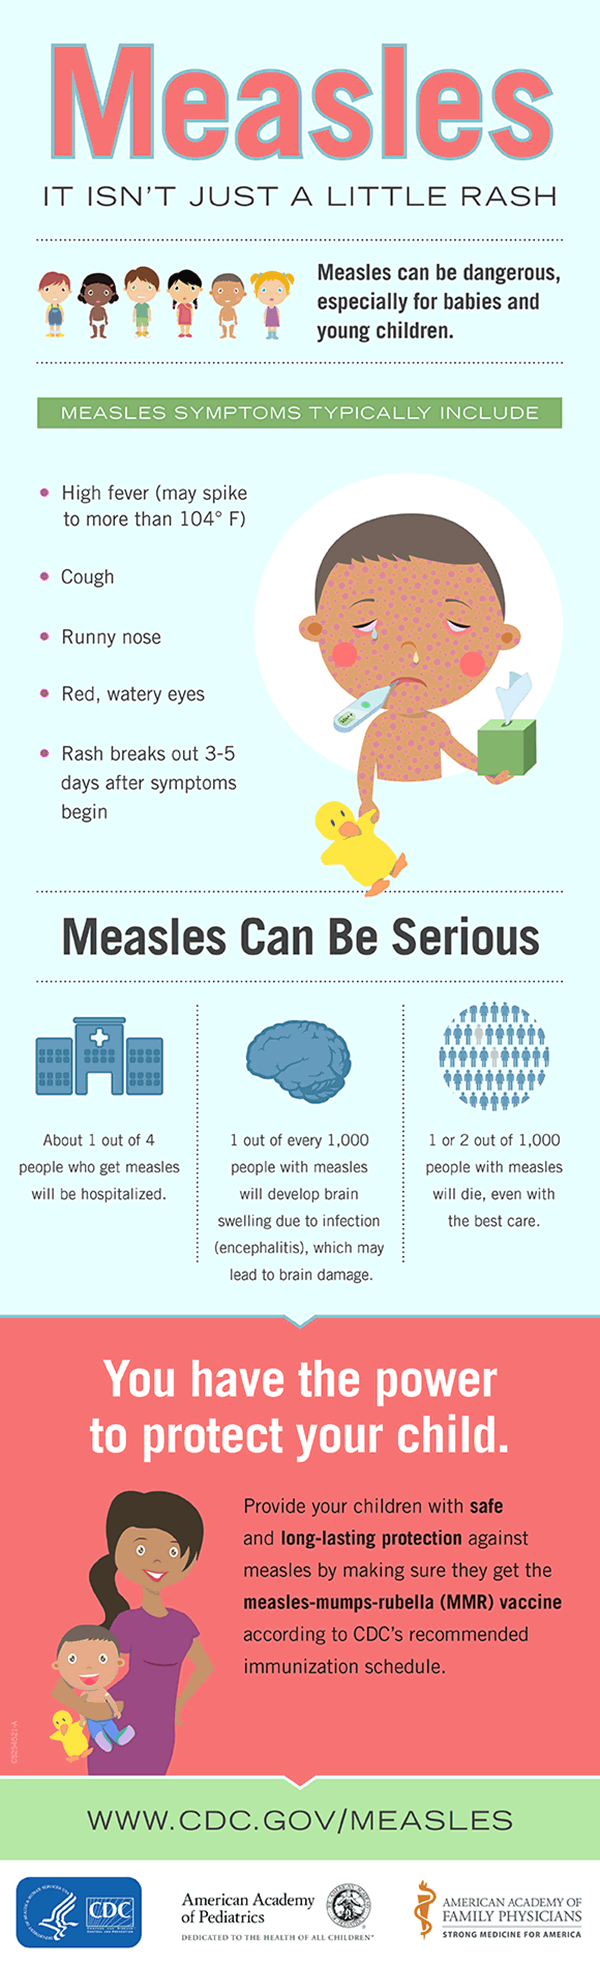 An infographic created by Centers for Disease Control and Prevention